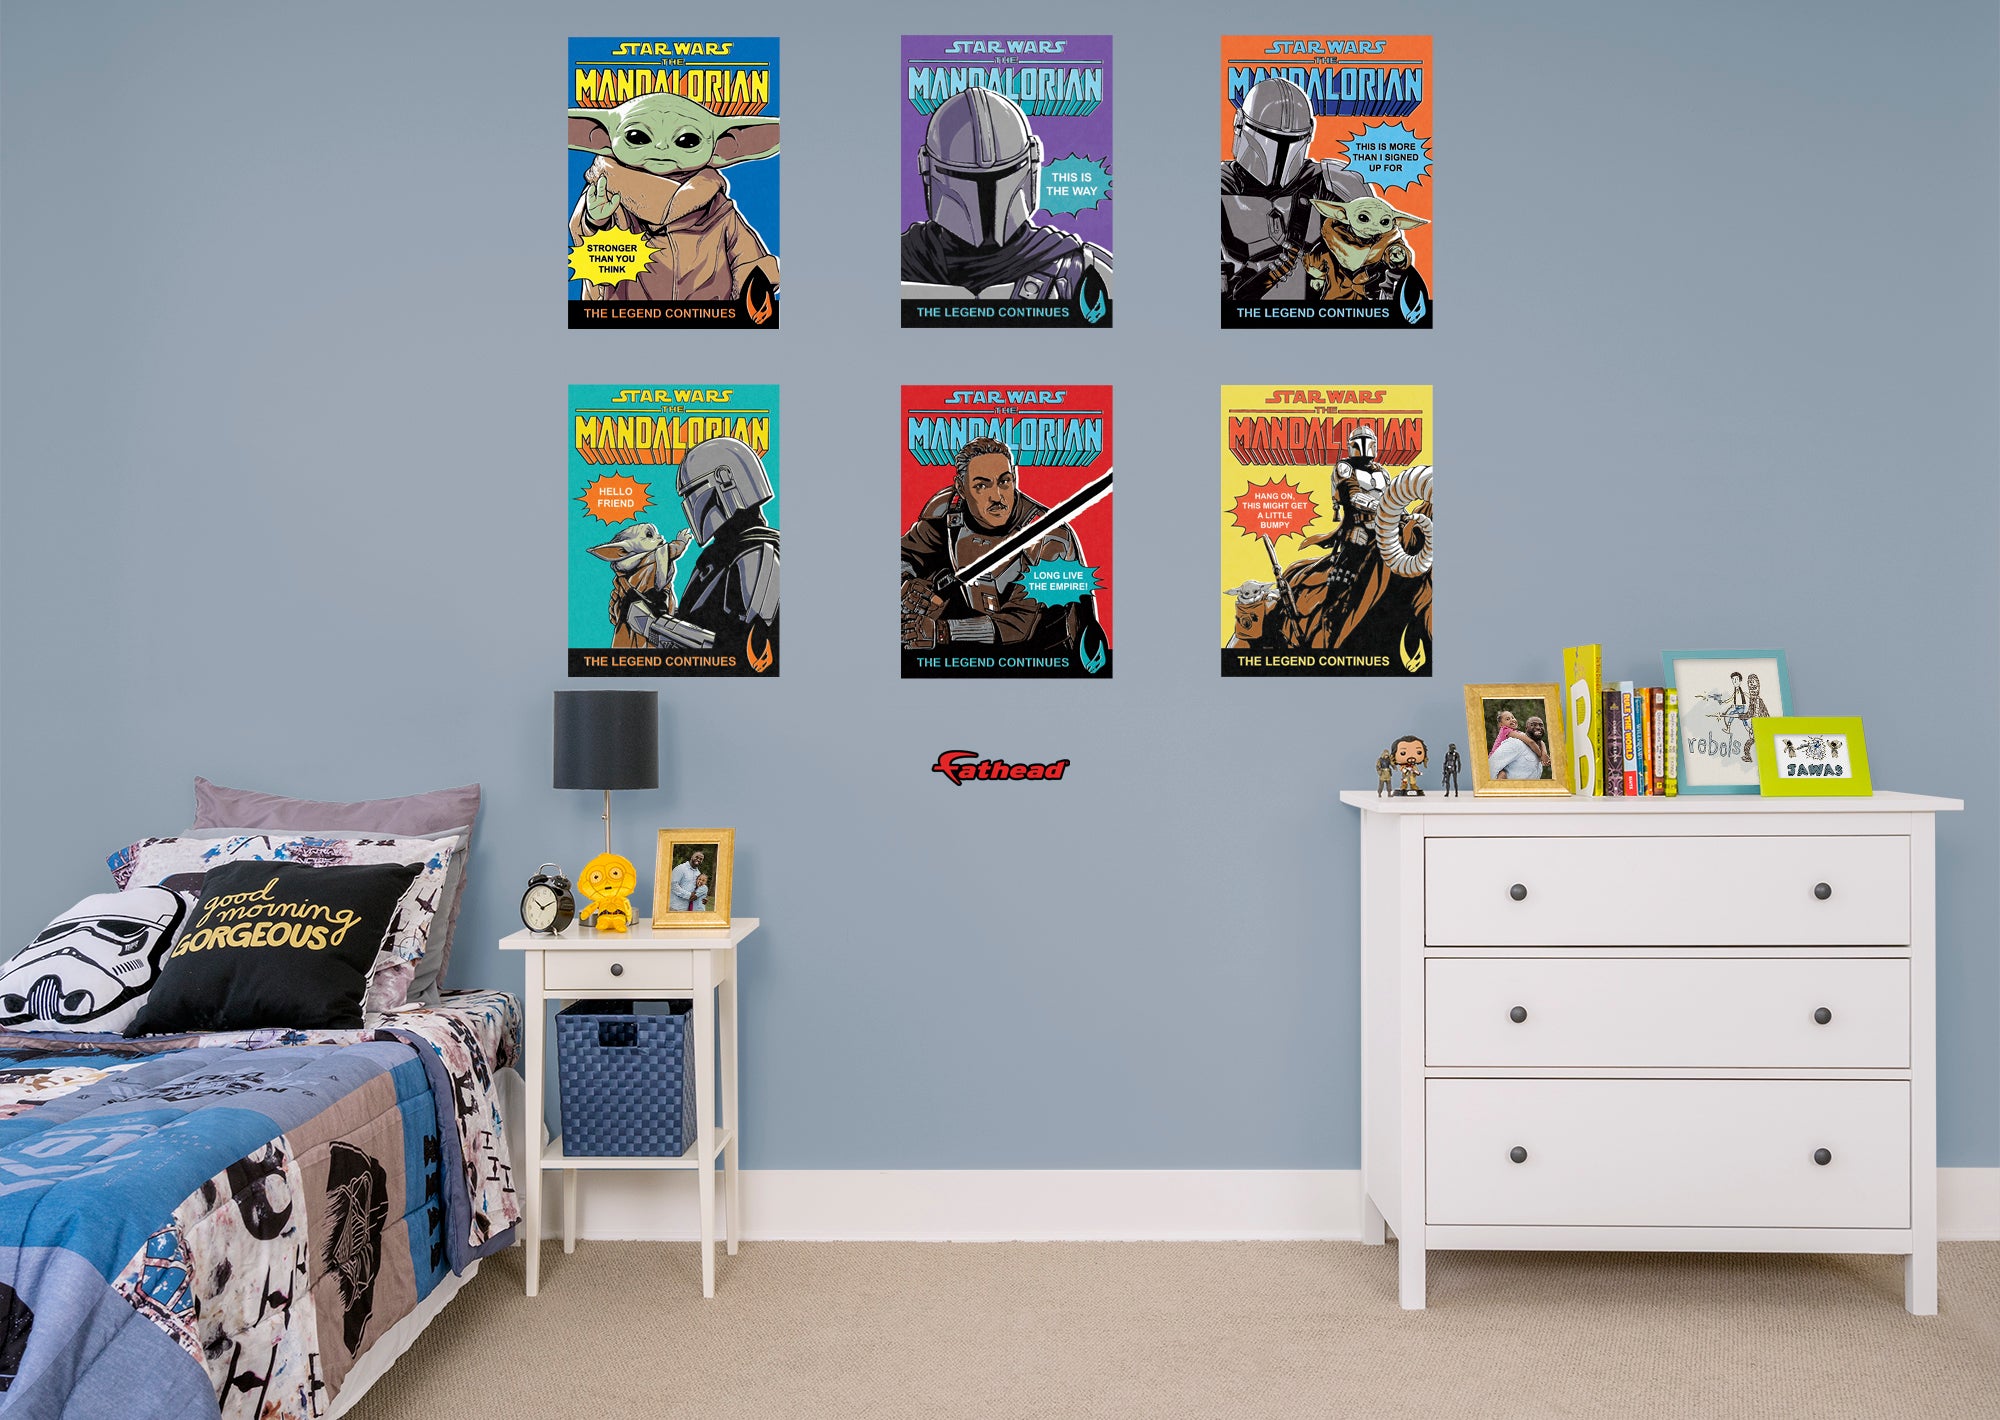 The Mandalorian Comic Book Cover Collection - Officially Licensed Star Wars Removable Wall Decal by Fathead | Vinyl